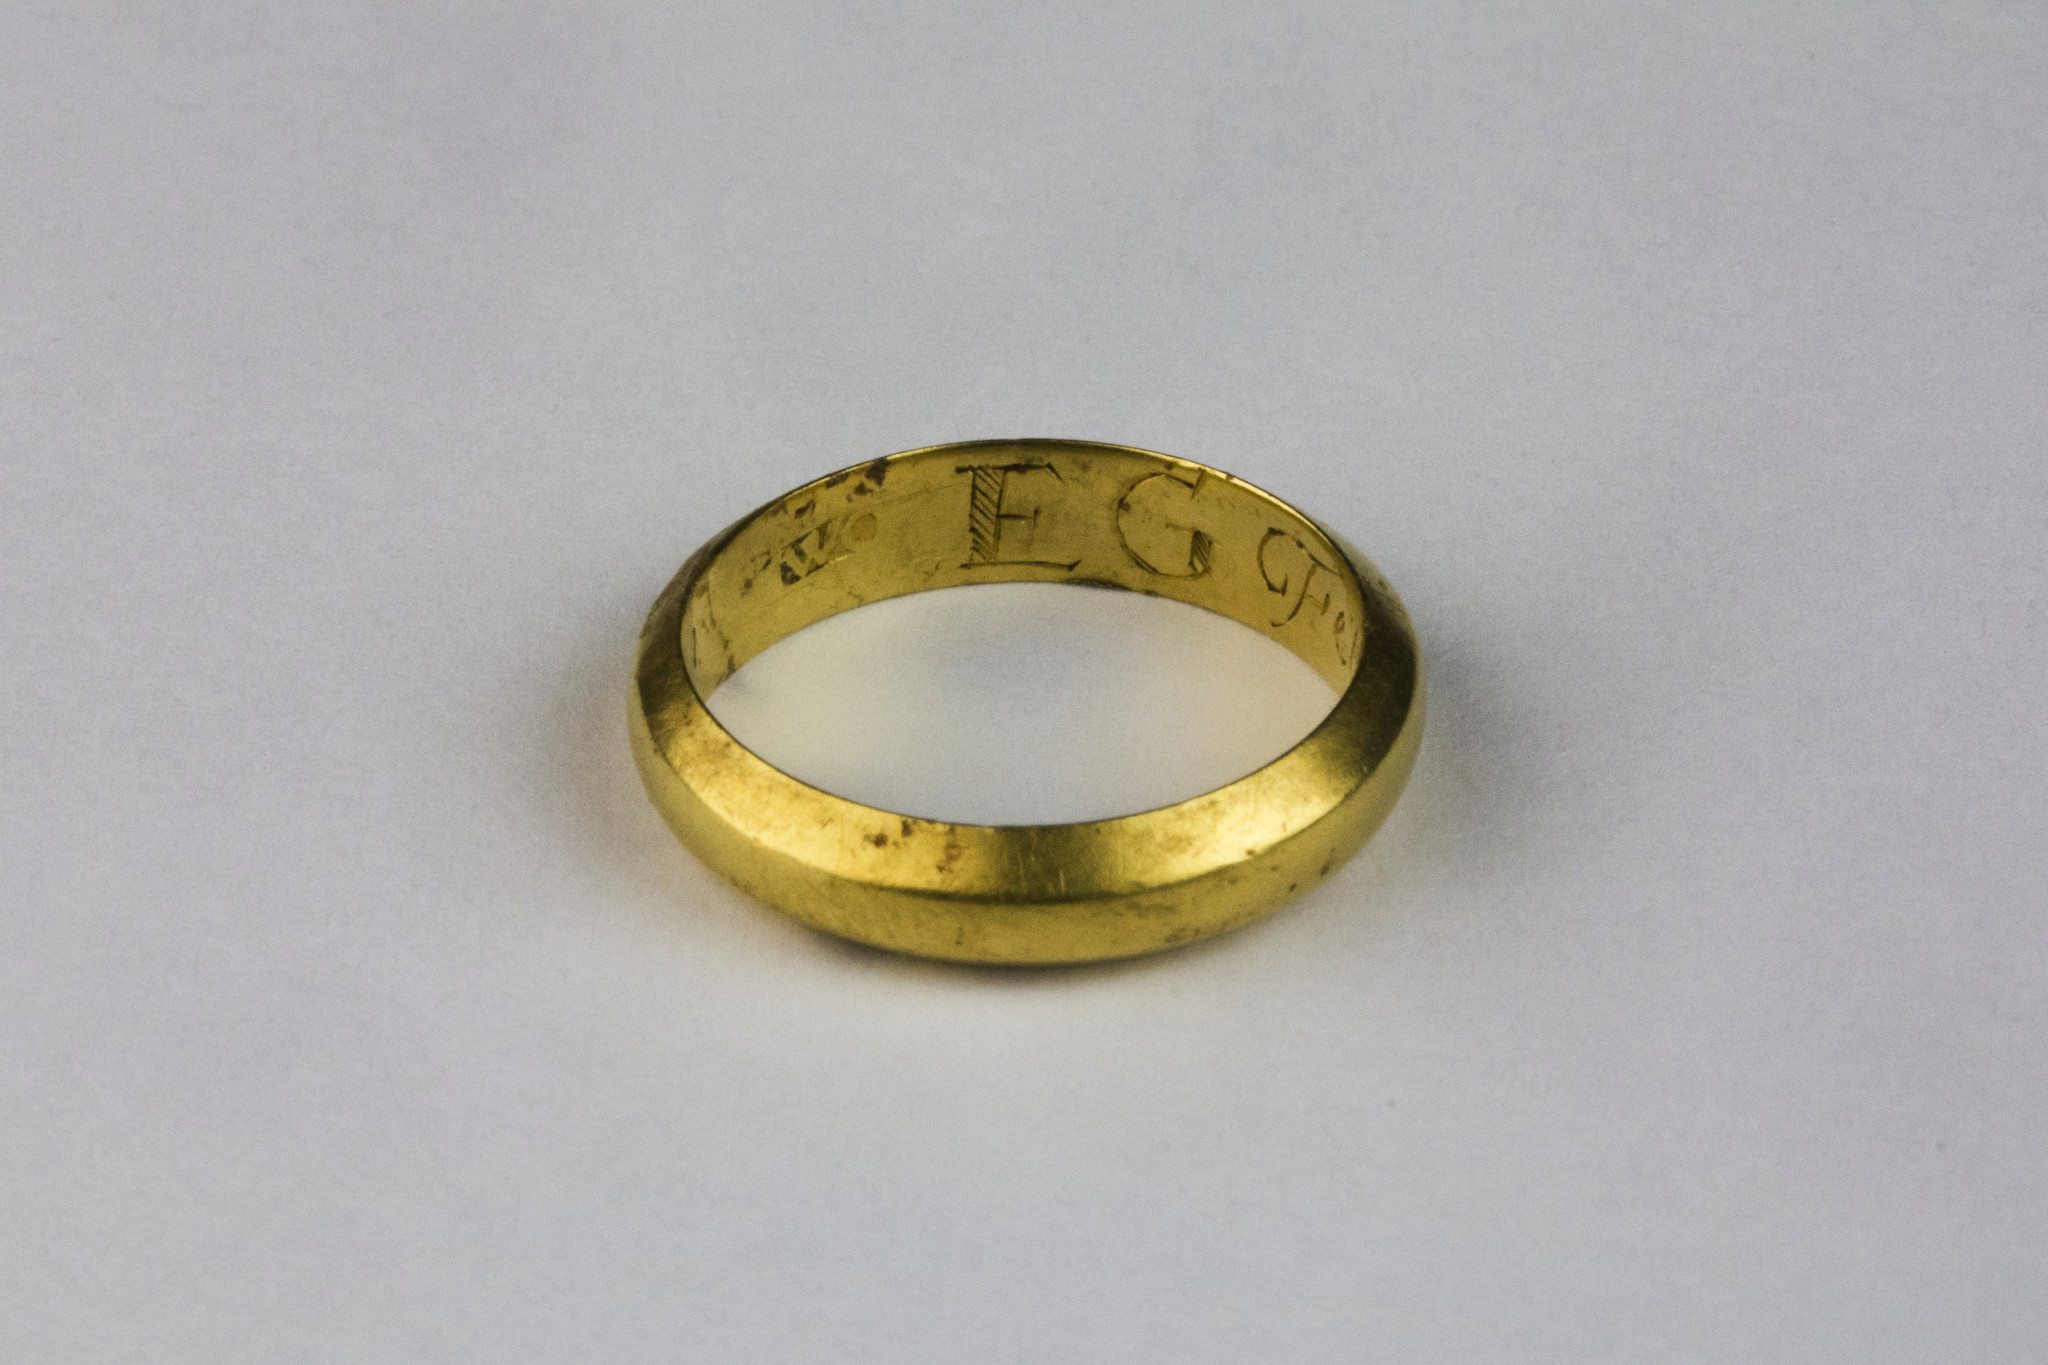 The Buttevant posy ring also bears the initials 'E G' on the interior (Copyright Rubicon Heritage)